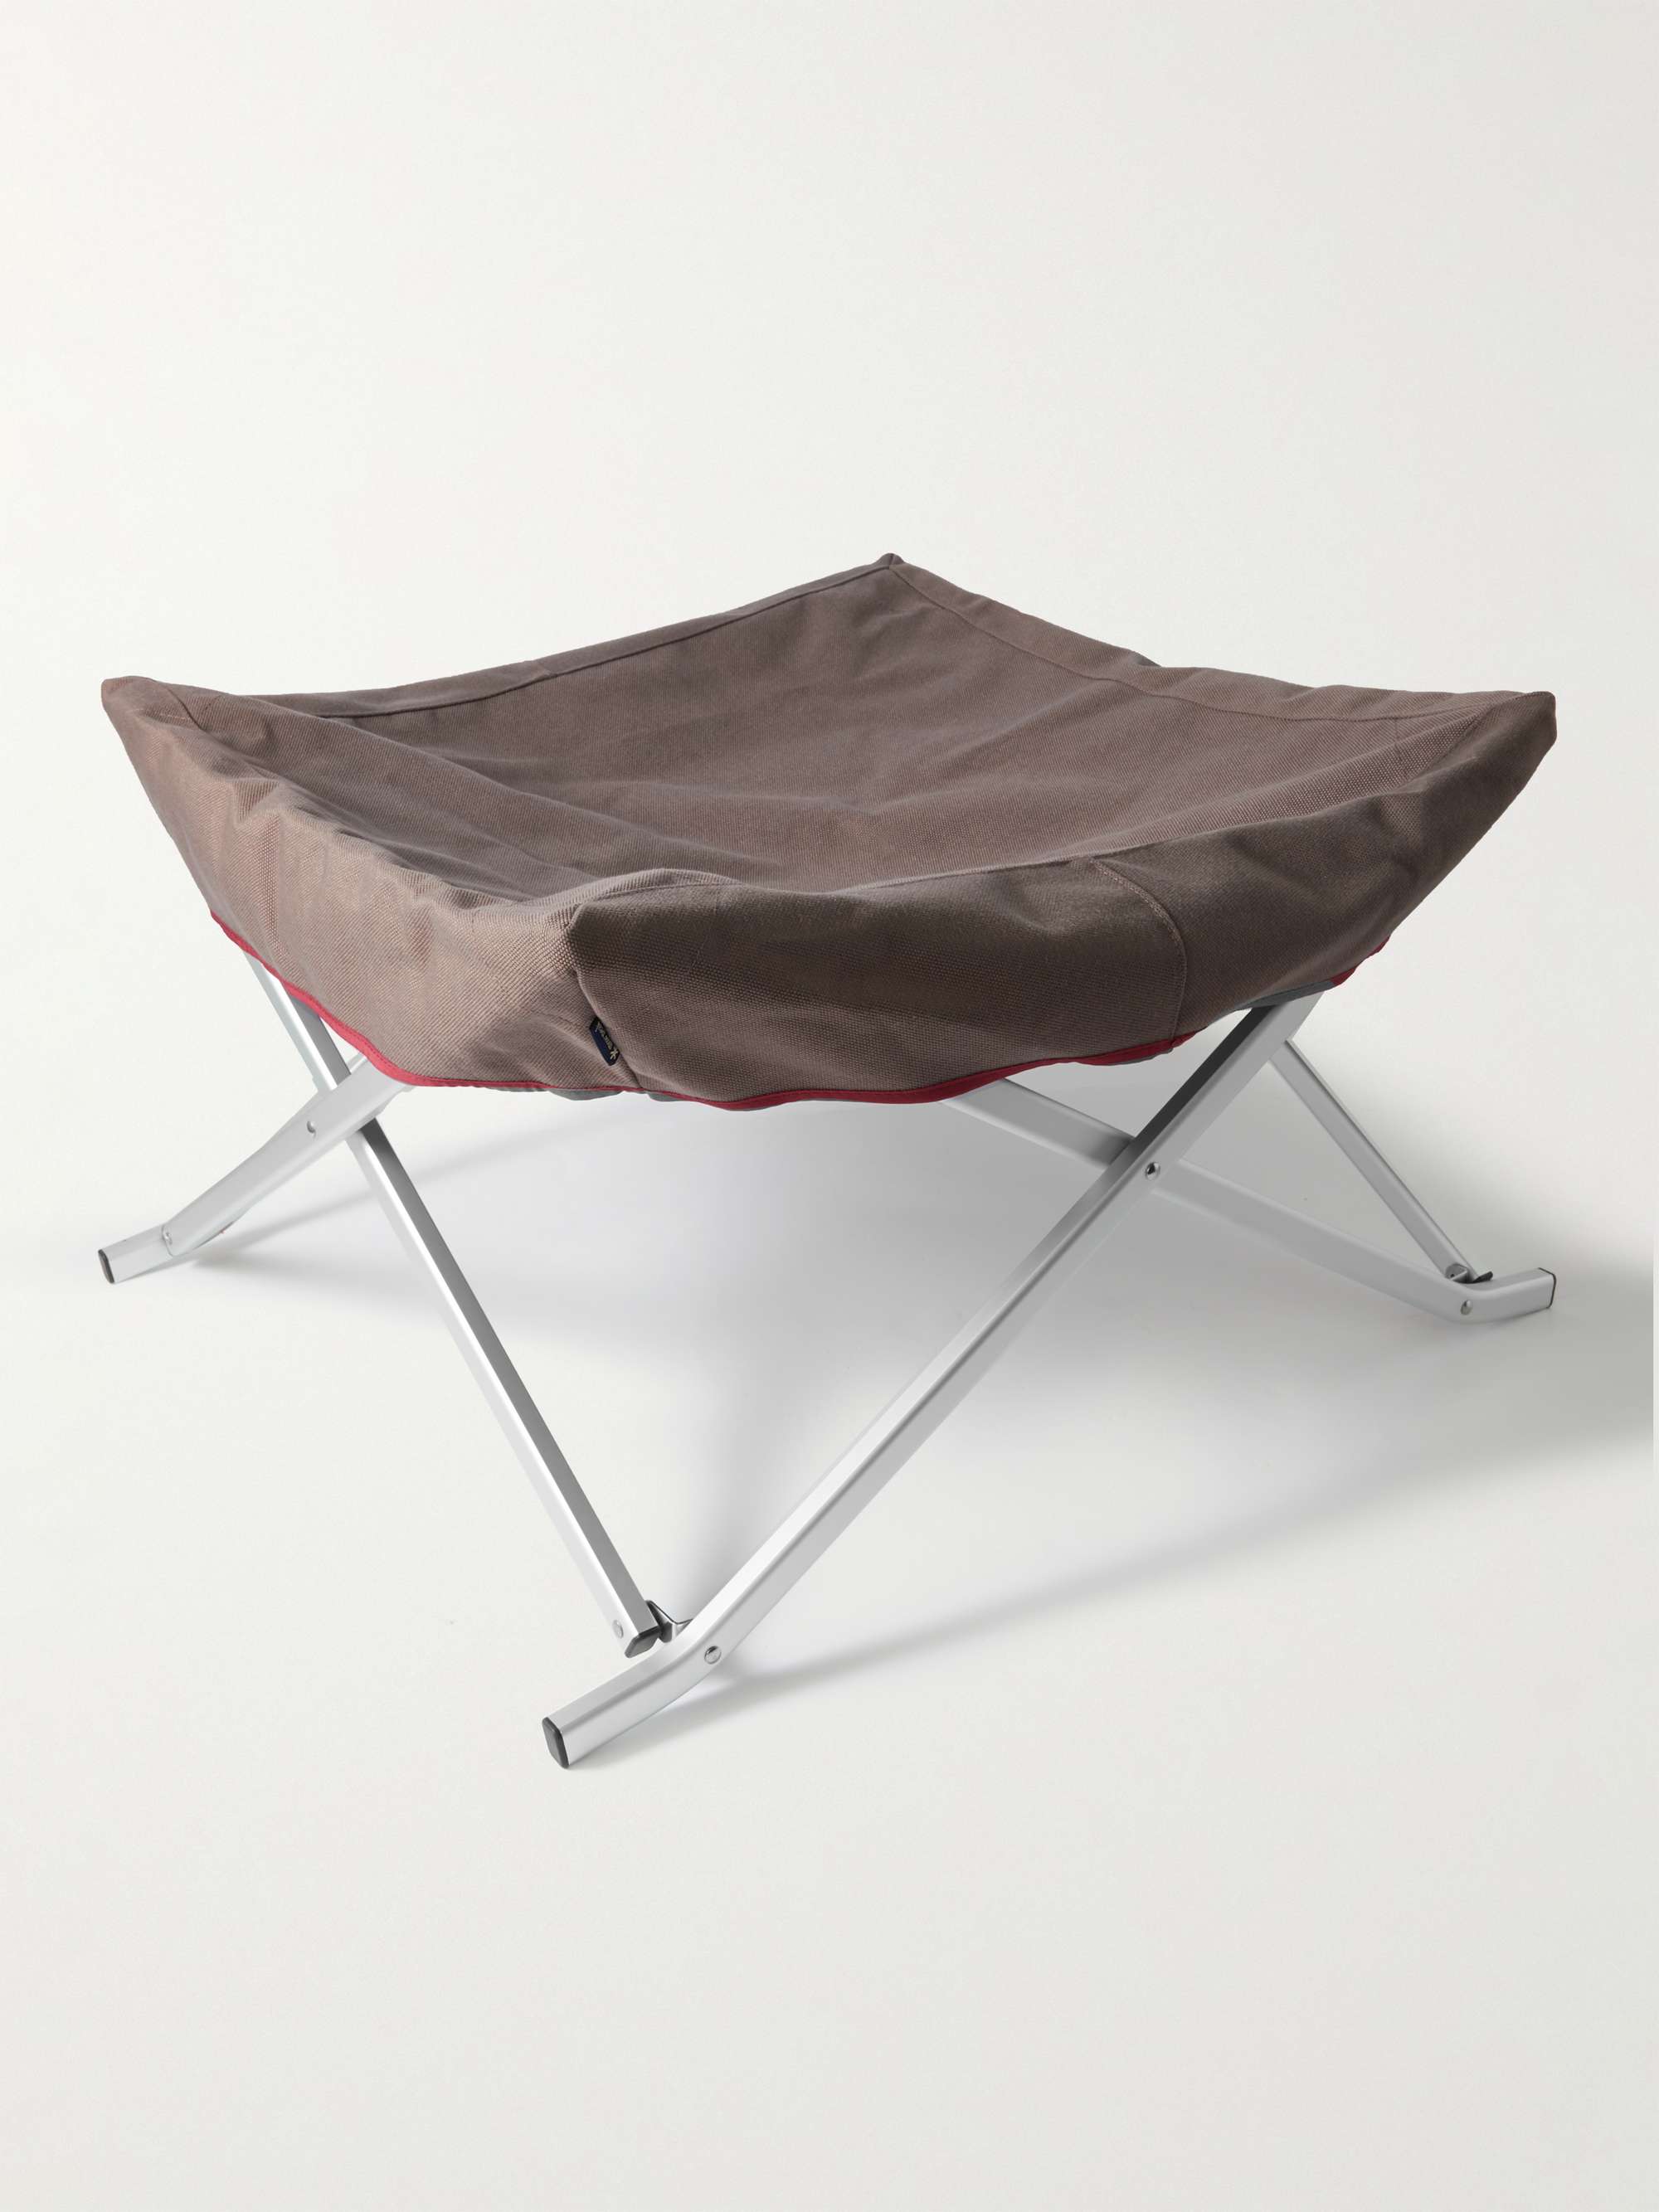 SNOW PEAK Stainless Steel and Canvas Packable Dog Cot